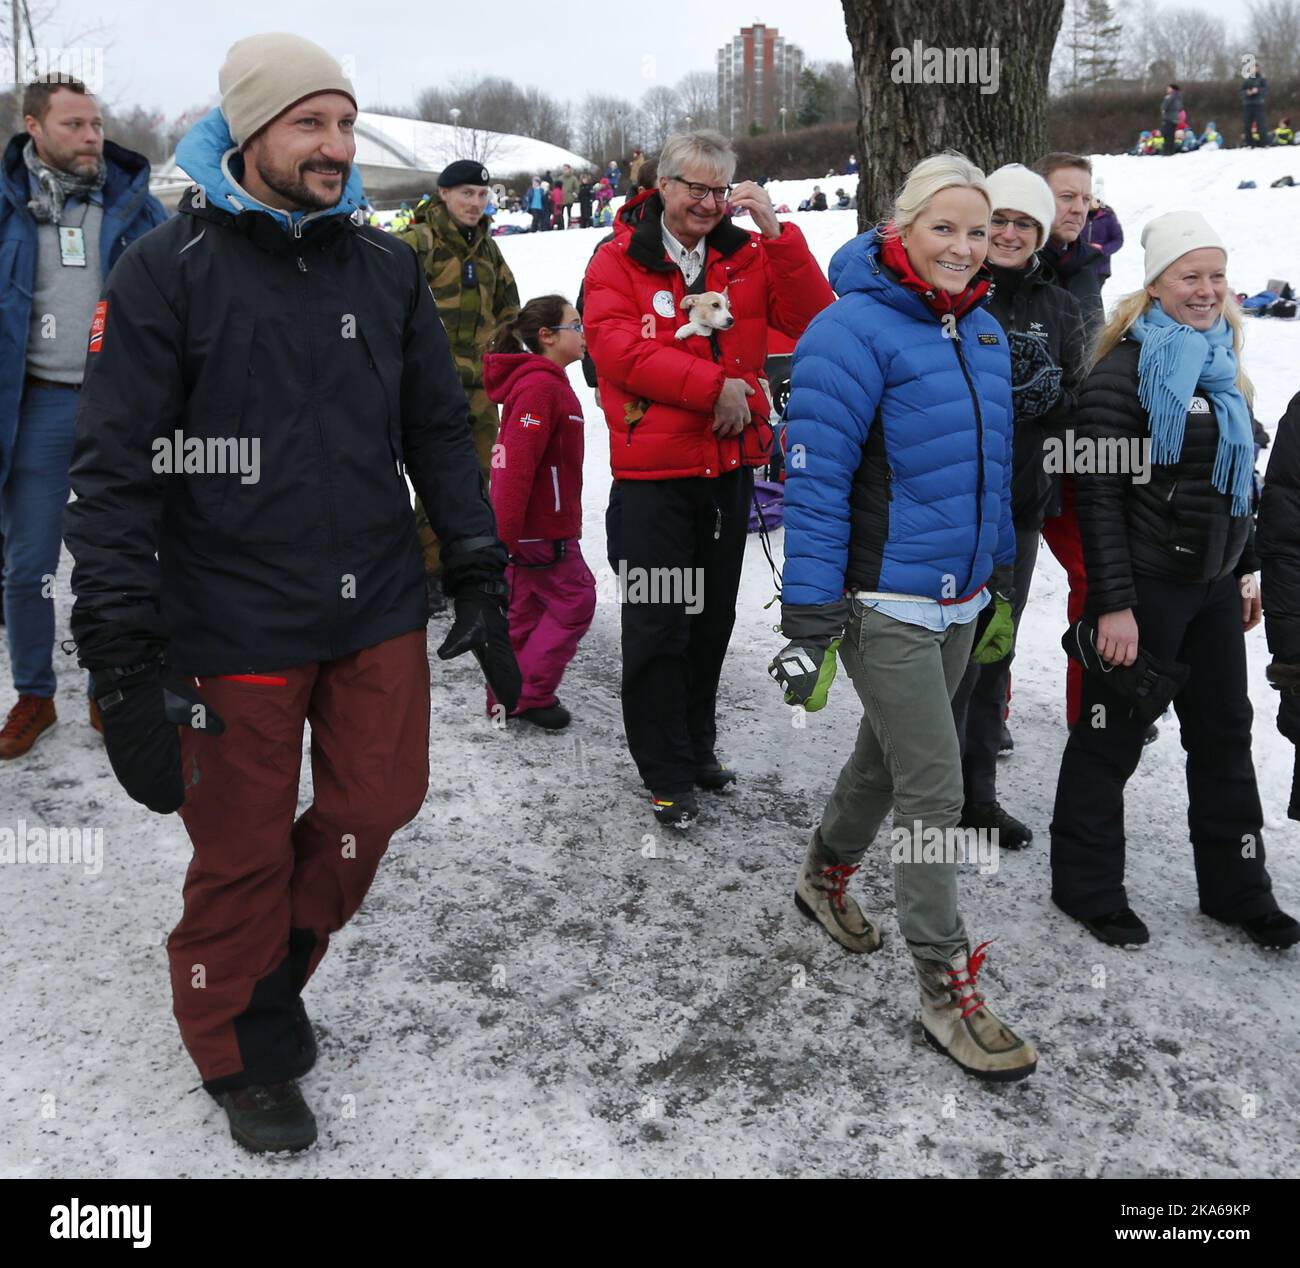 Oslo, Norway 20150113. The Royal Crown Prince Couple visit Toyenparken in Oslo on Tuesday for the opening of the Outdoor Recreation Year 2015 (Friluftlivets aar). 1600 children an youth attended the opening. Crown Prince Haakon and Crown Princess Mette-Marit in the park with mayor Fabian Stang (in red with his puppy). Photo: Lise Aserud / NTB scanpix Stock Photo